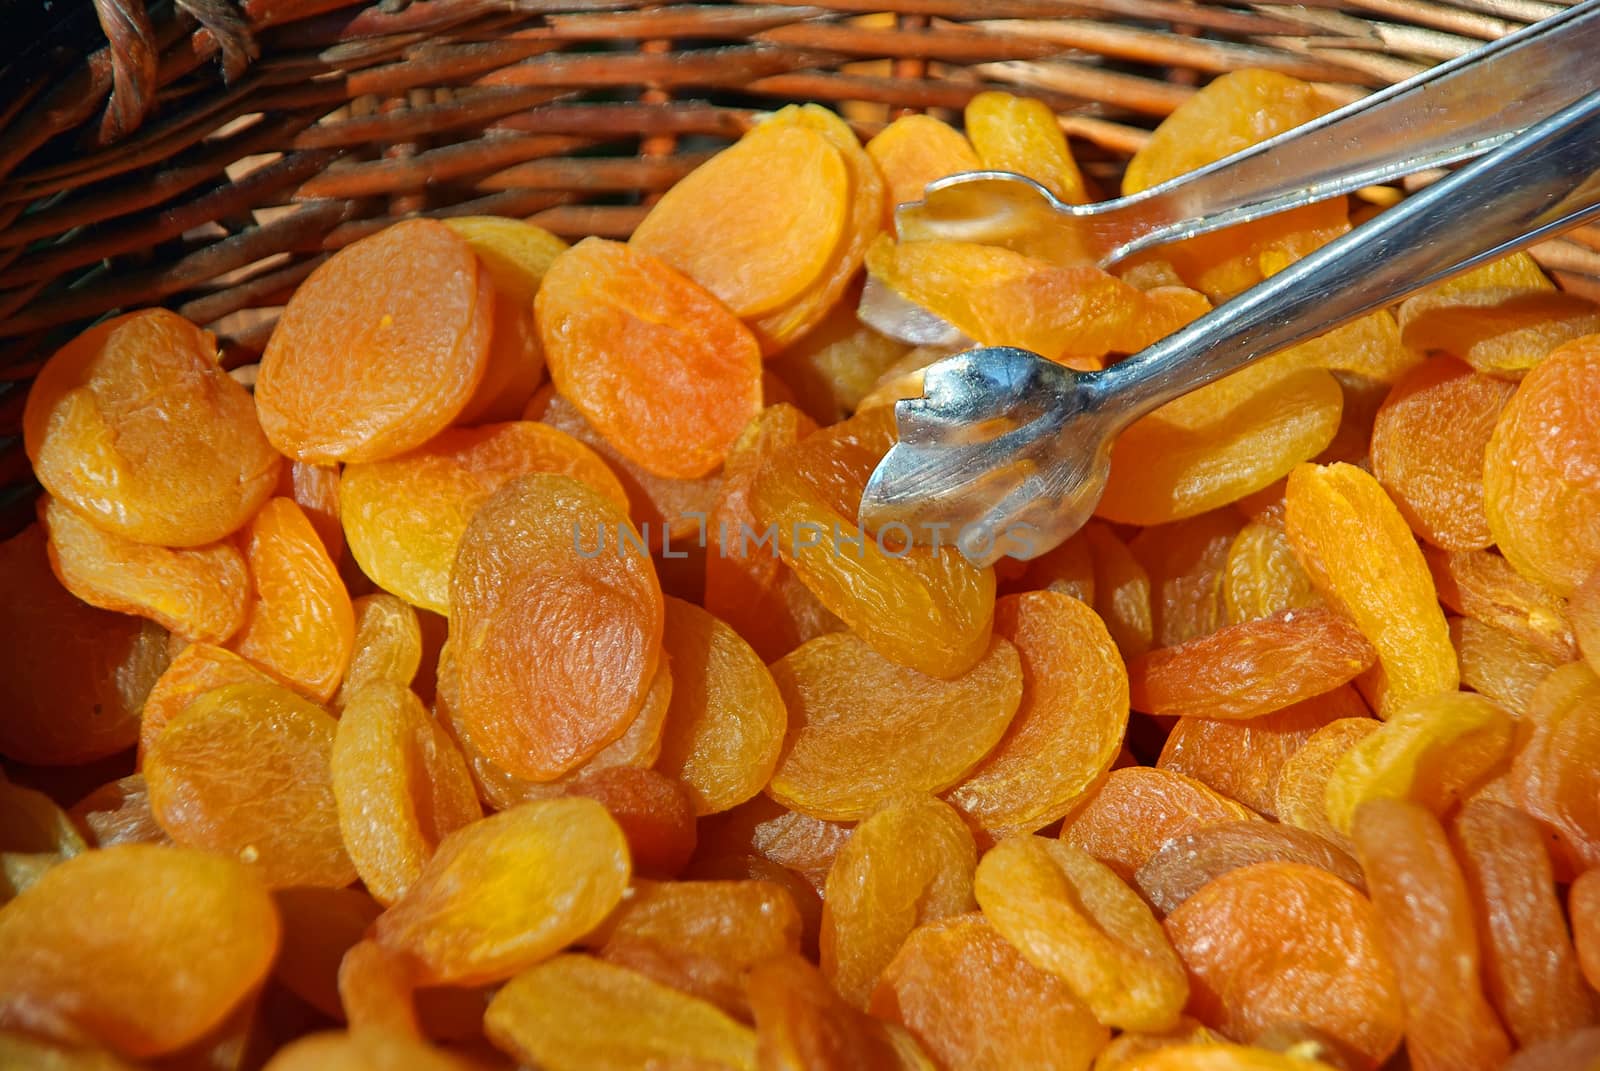 Typical Dry Apricots from Majorca (Spain)